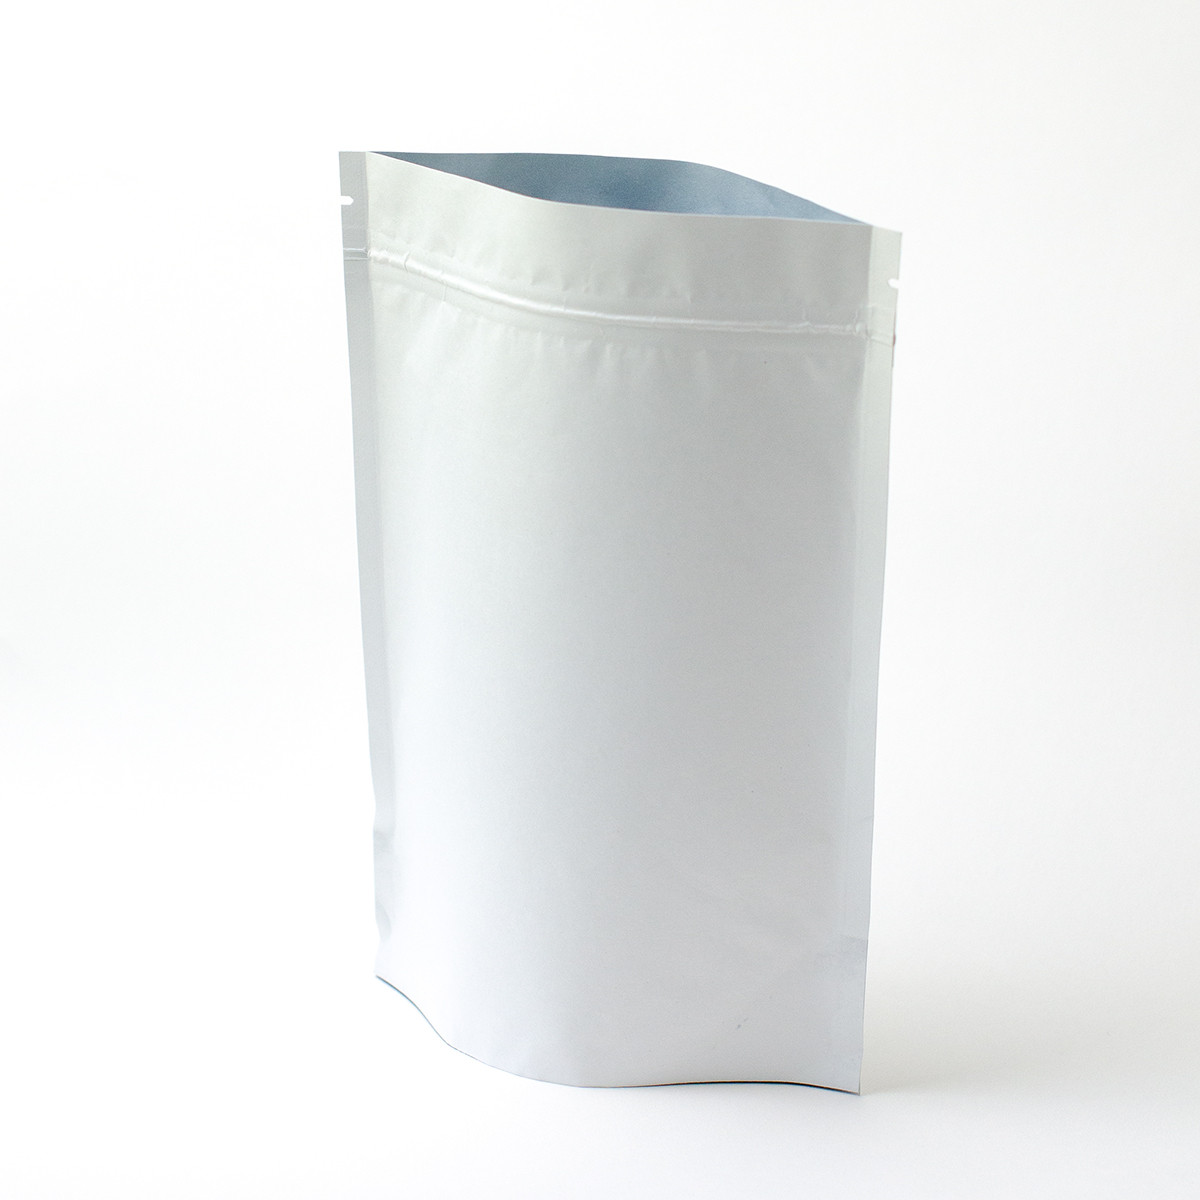 Non-Shrink Bags and Vacuum Pouches